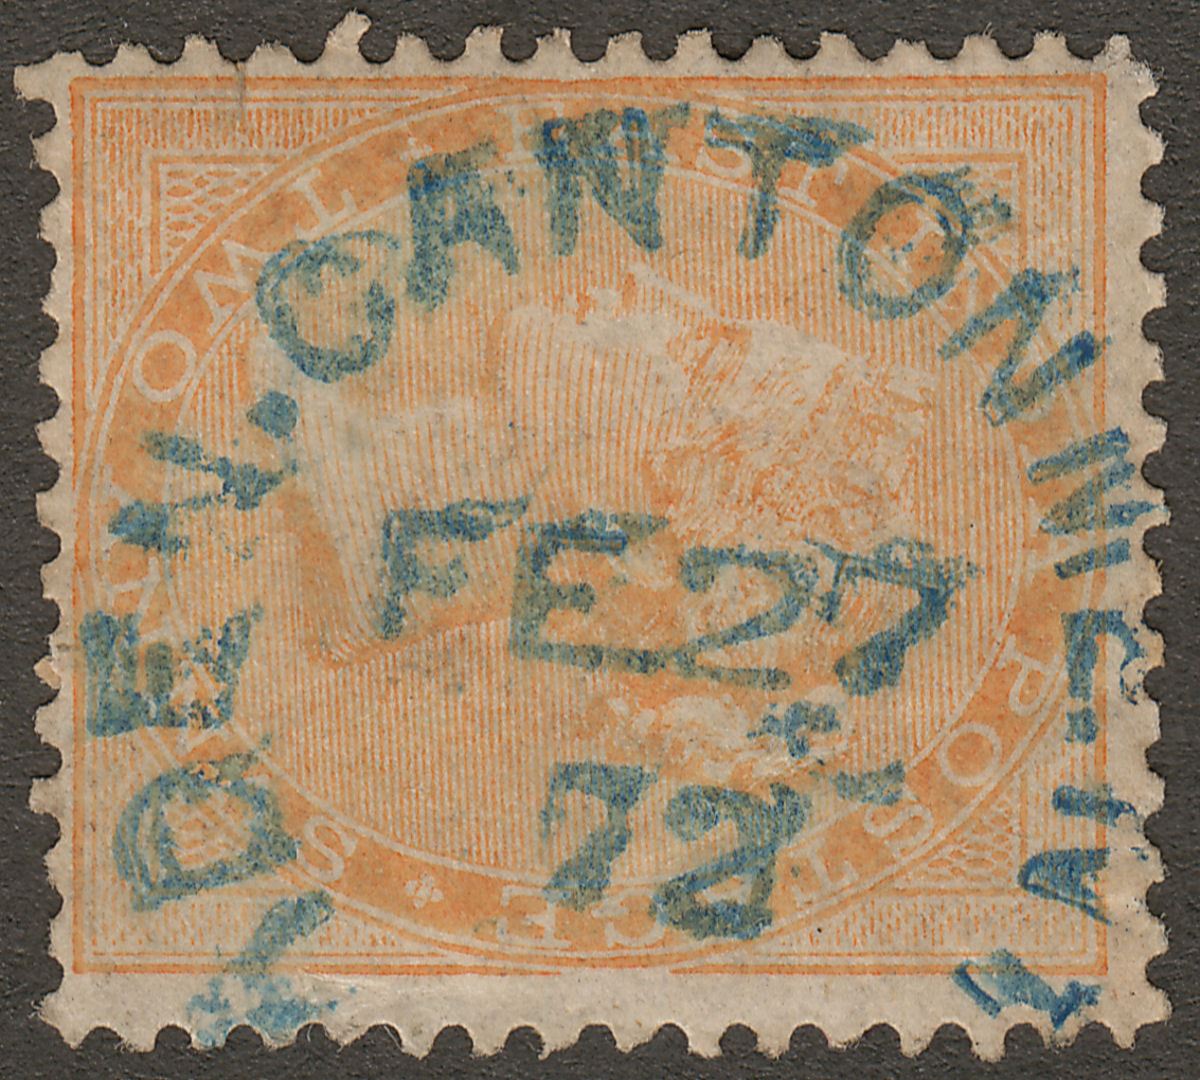 India used Aden 1872 QV 2a Used blue ADEN-CANTONMENT 124 Duplex Postmark KD7